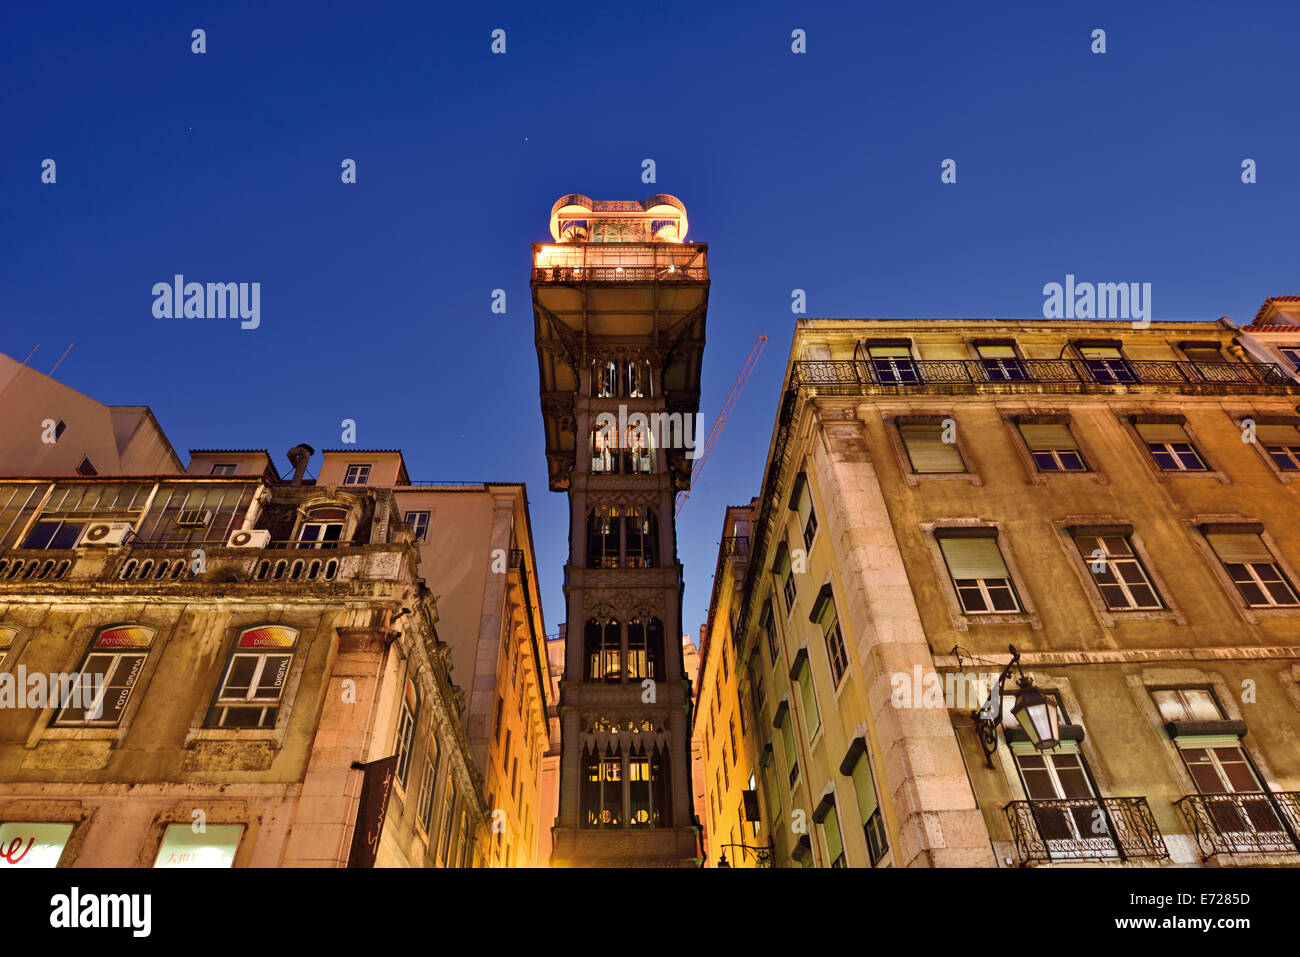 Portugal: Nocturnal view of the Santa Justa Elevator in downtown Lisbon Stock Photo